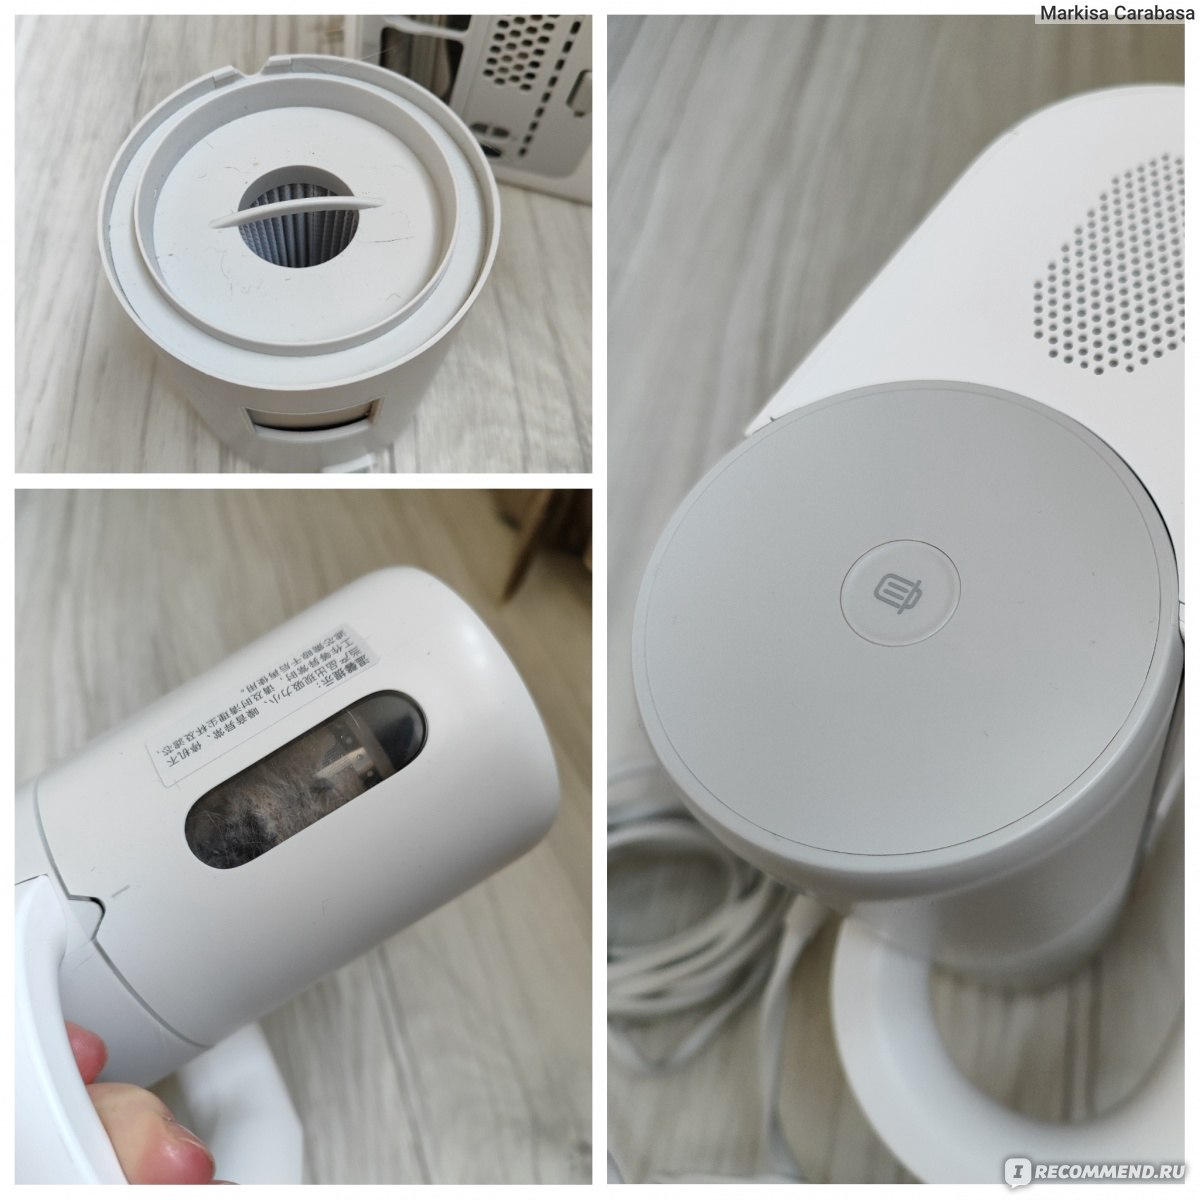 Xiaomi dust mite vacuum cleaner mjcmy01dy. Пылесос Xiaomi (mjcmy01dy). Xiaomi Dust Mite Vacuum. Xiaomi Dust Mite Vacuum Cleaner mjcmy01dy лампочка. Xiaomi Mijia Dust Mite Vacuum Cleaner.